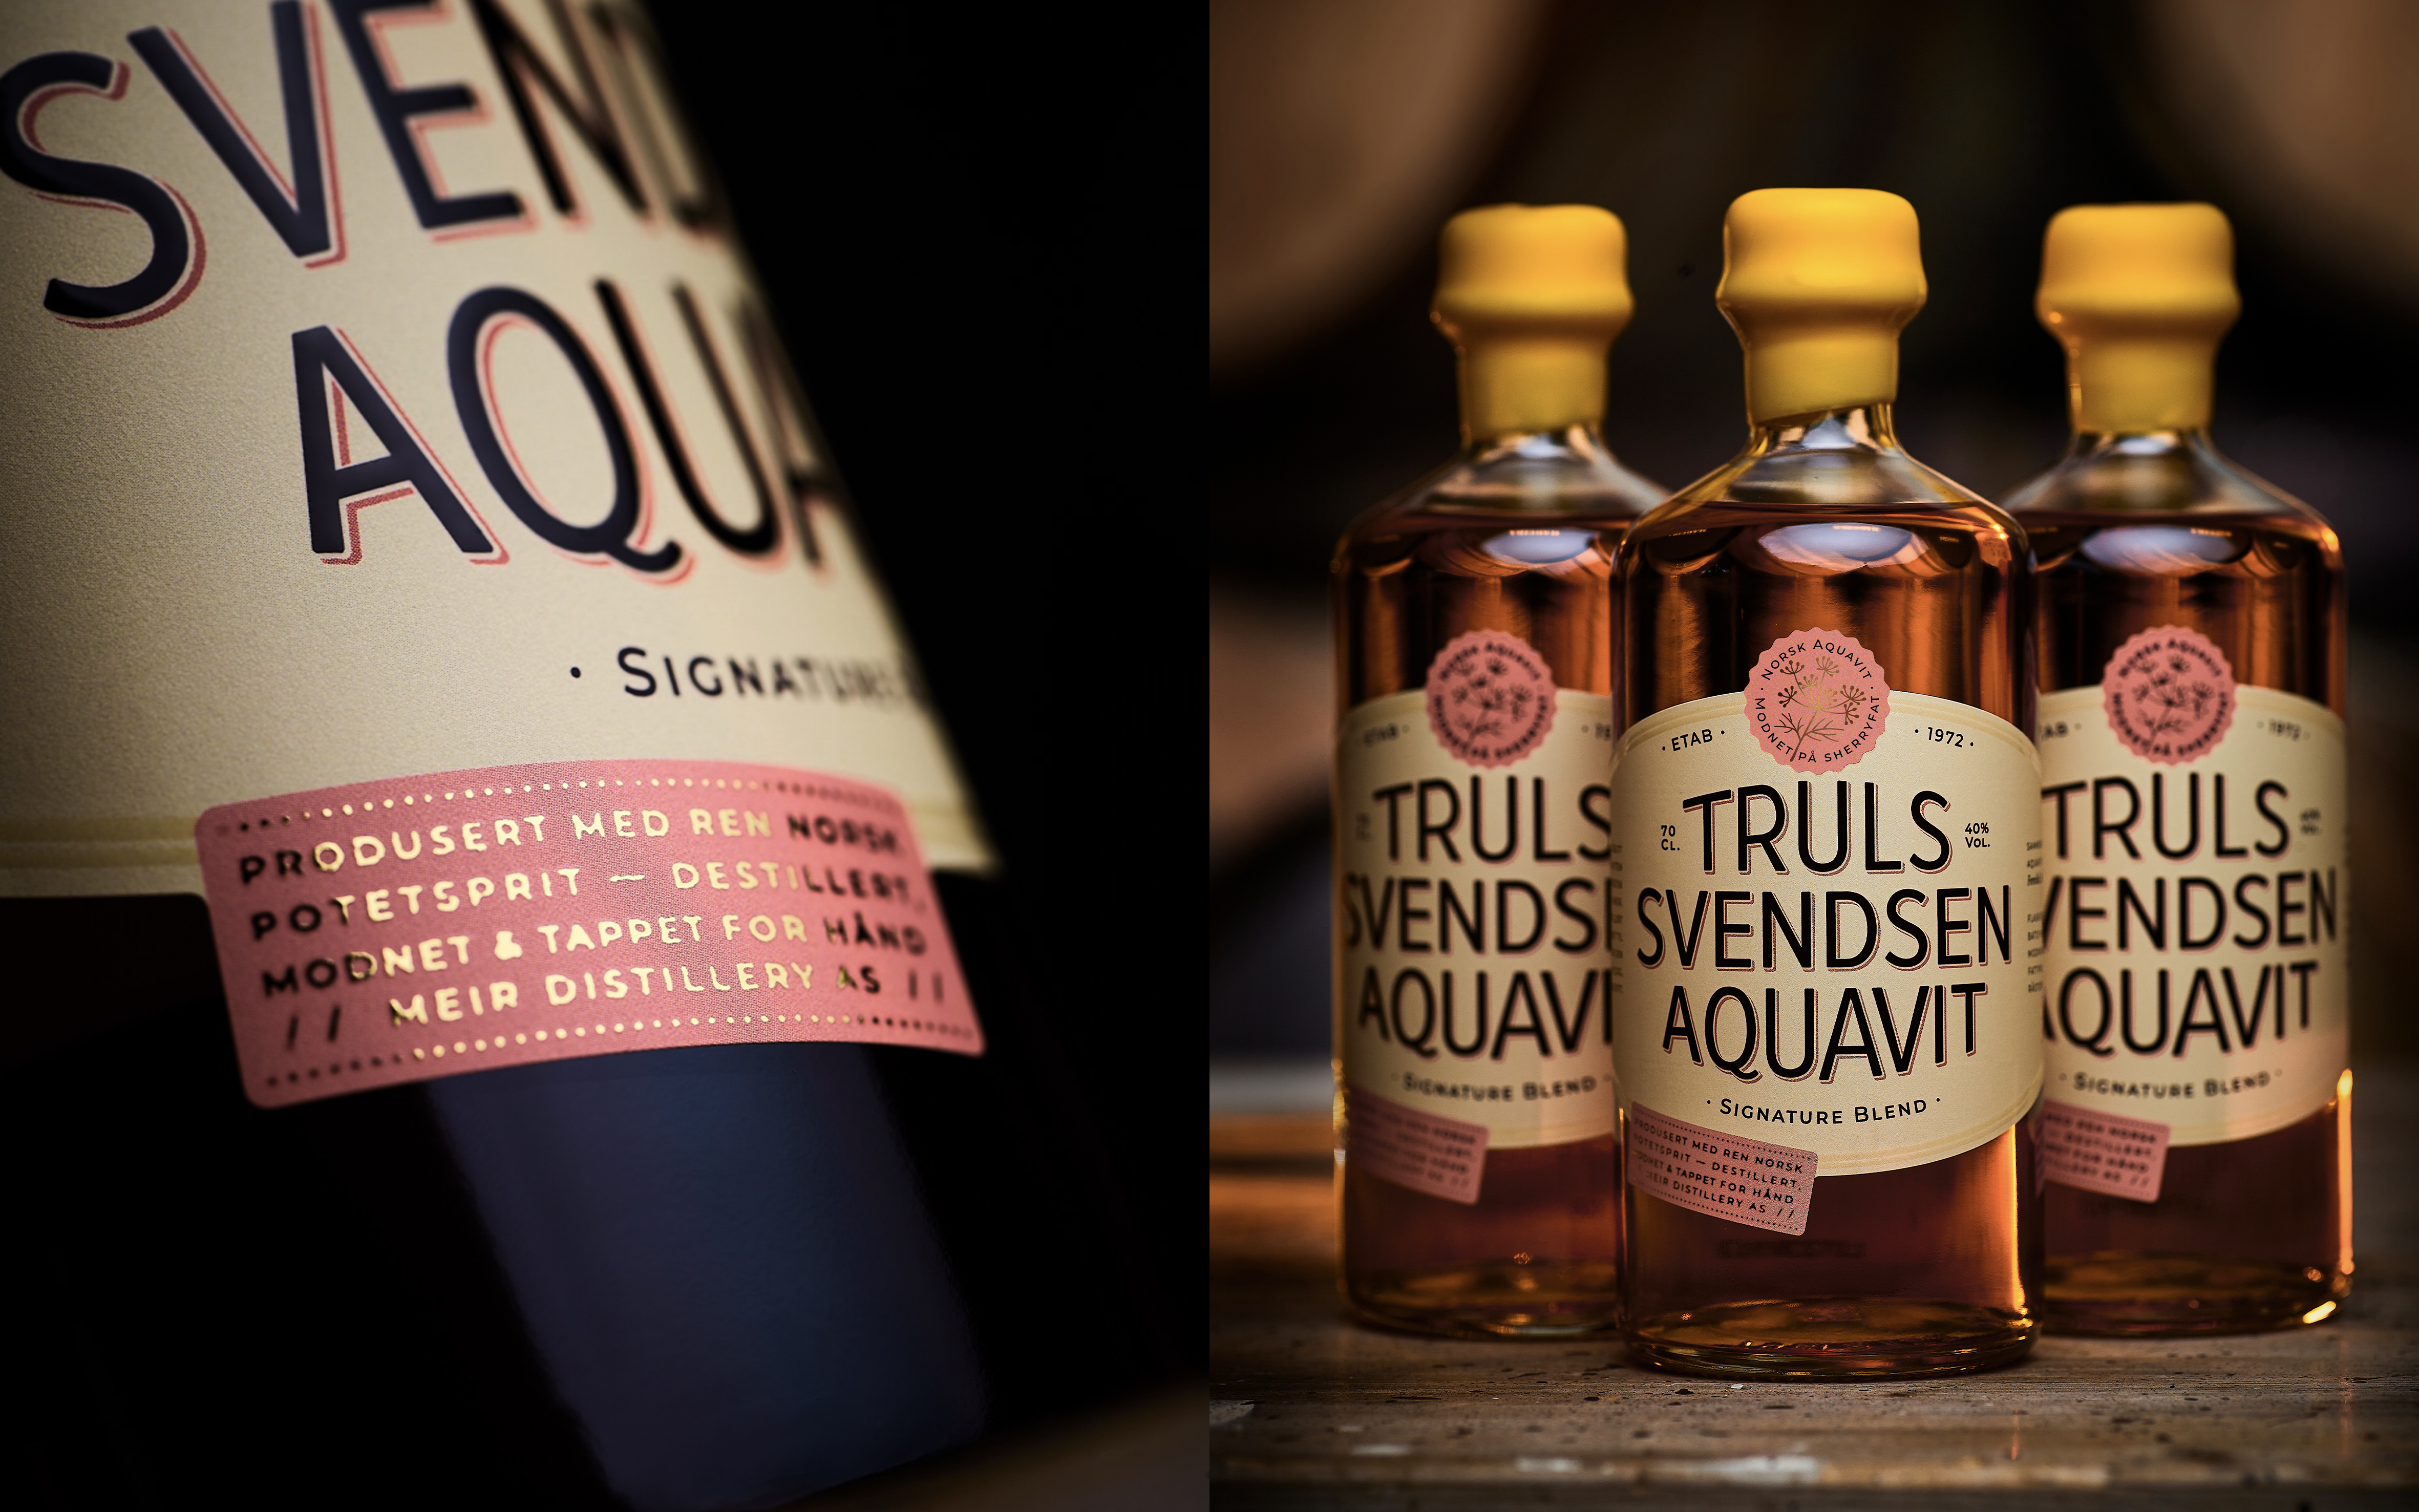 Truls Svendsen’s Aquavit Boasts Soft, Earthy Design Straight Out of an Apothecary